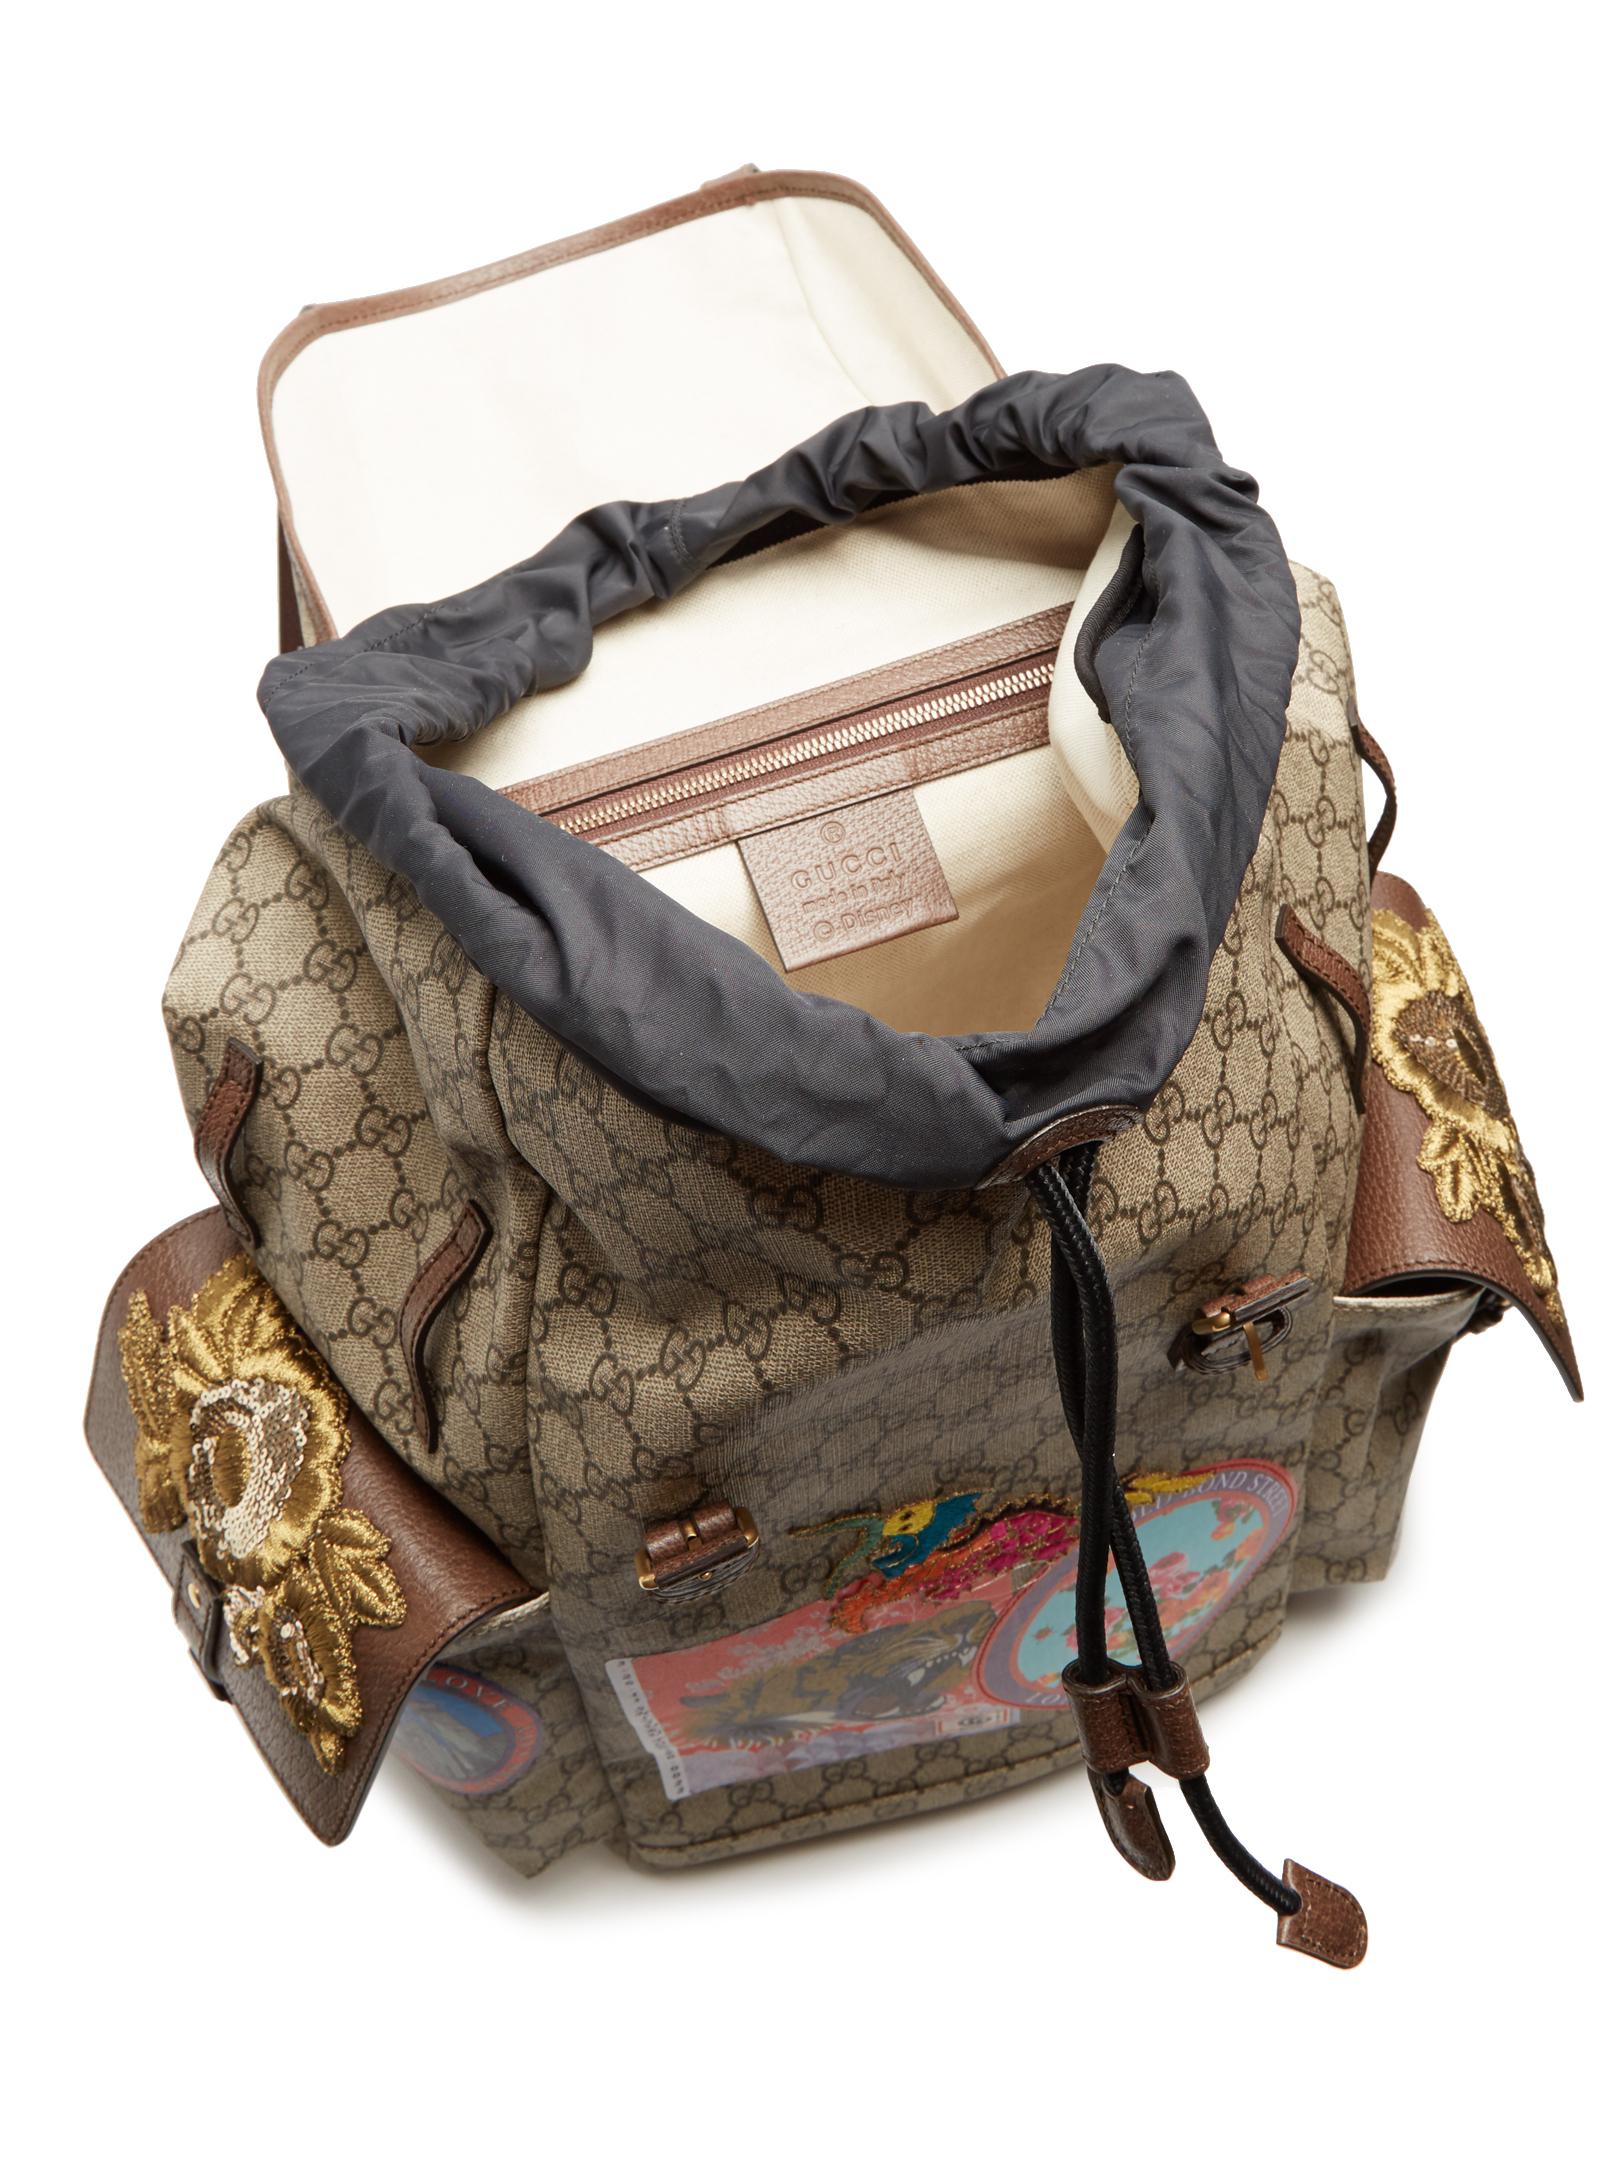 Gucci Gg Supreme Embroidered Leather Backpack in Brown for Men - Lyst